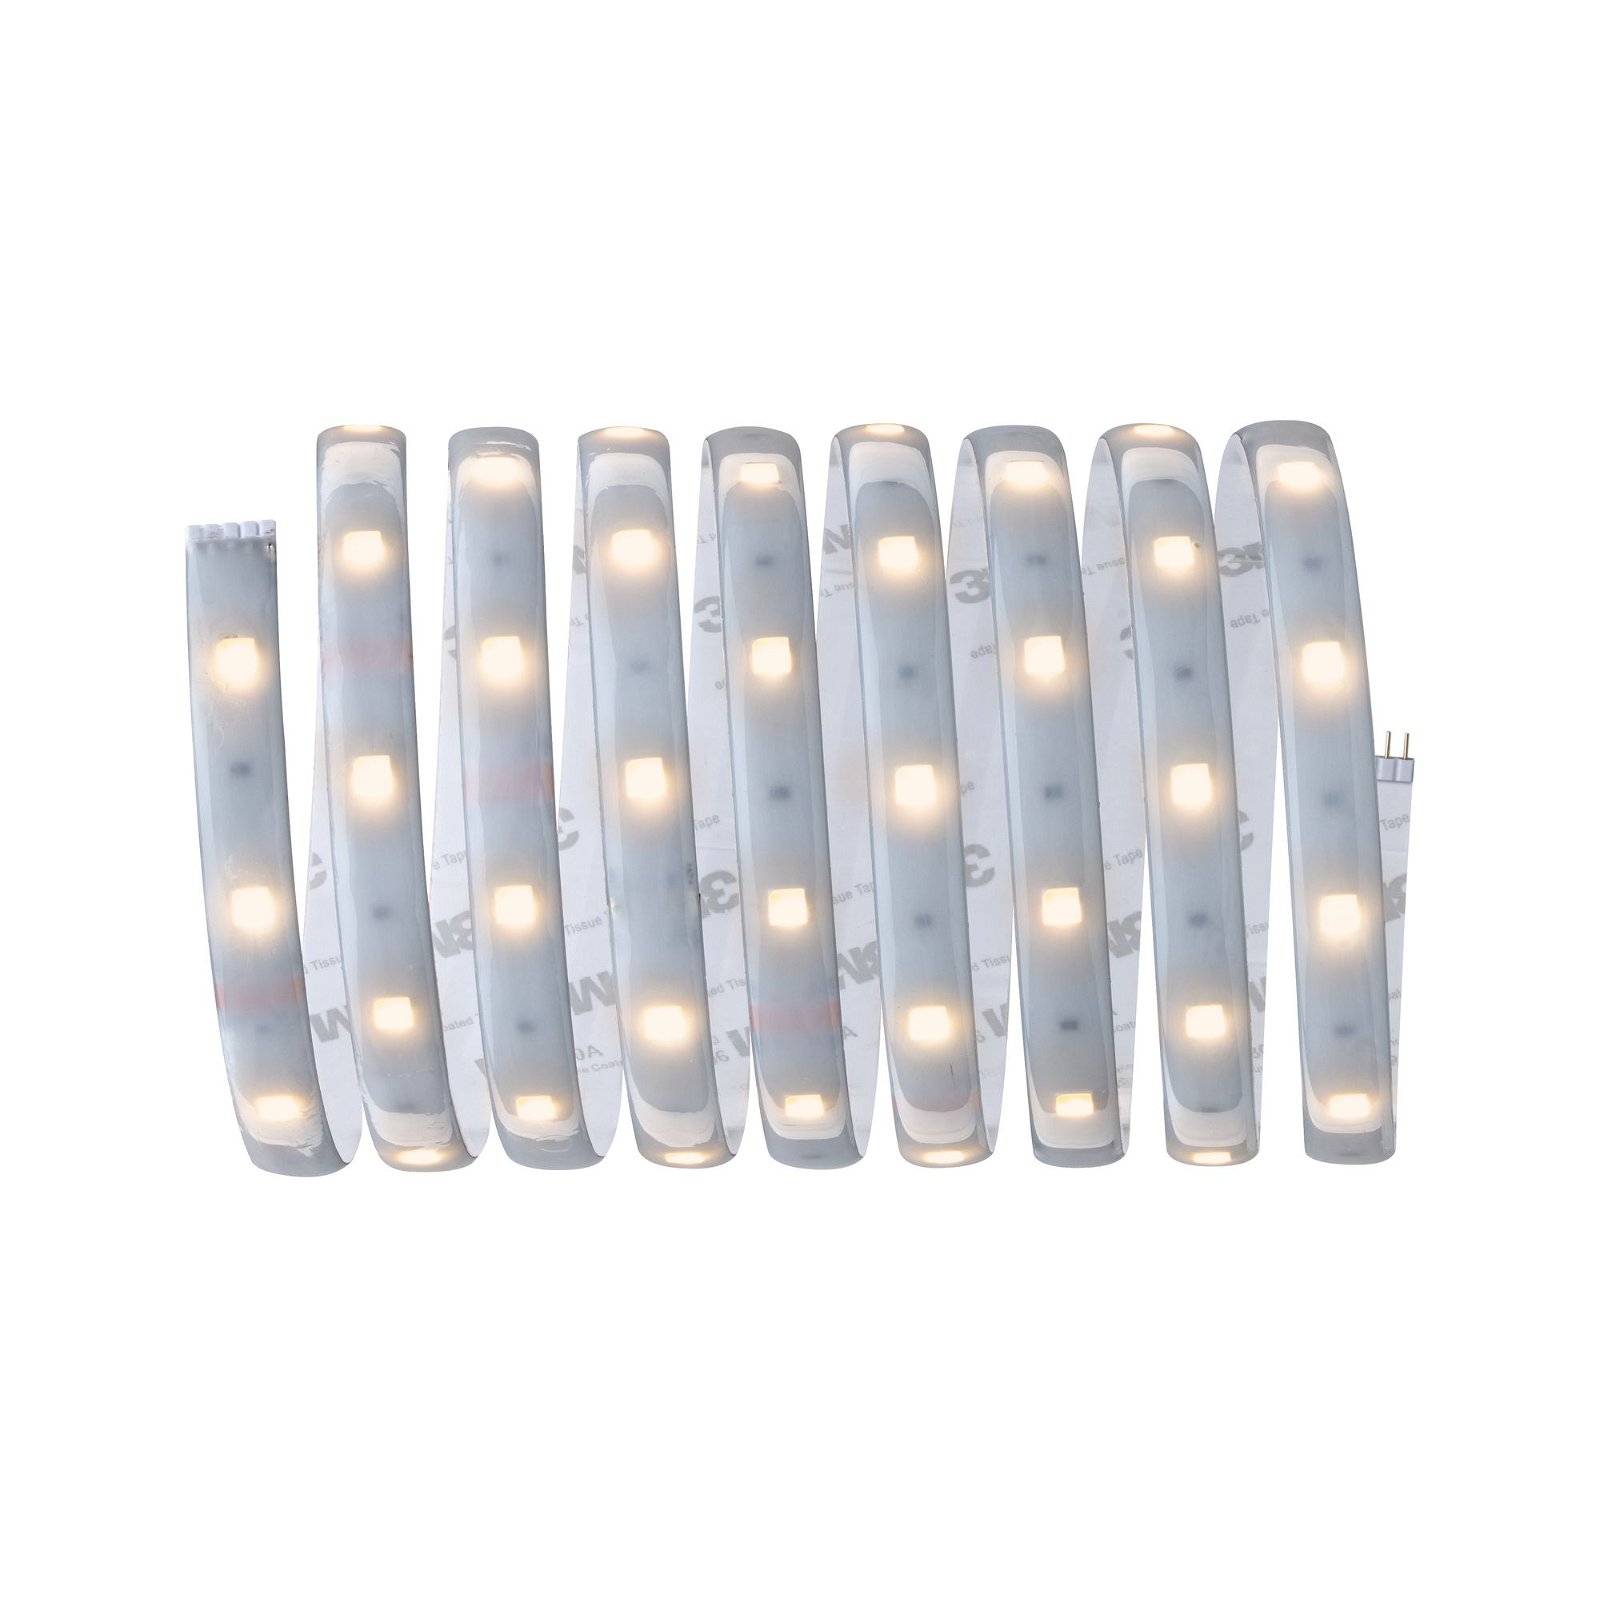 MaxLED 250 Strip LED Tunable White 2,5m recouvert IP44 9W 230lm/m Tunable White